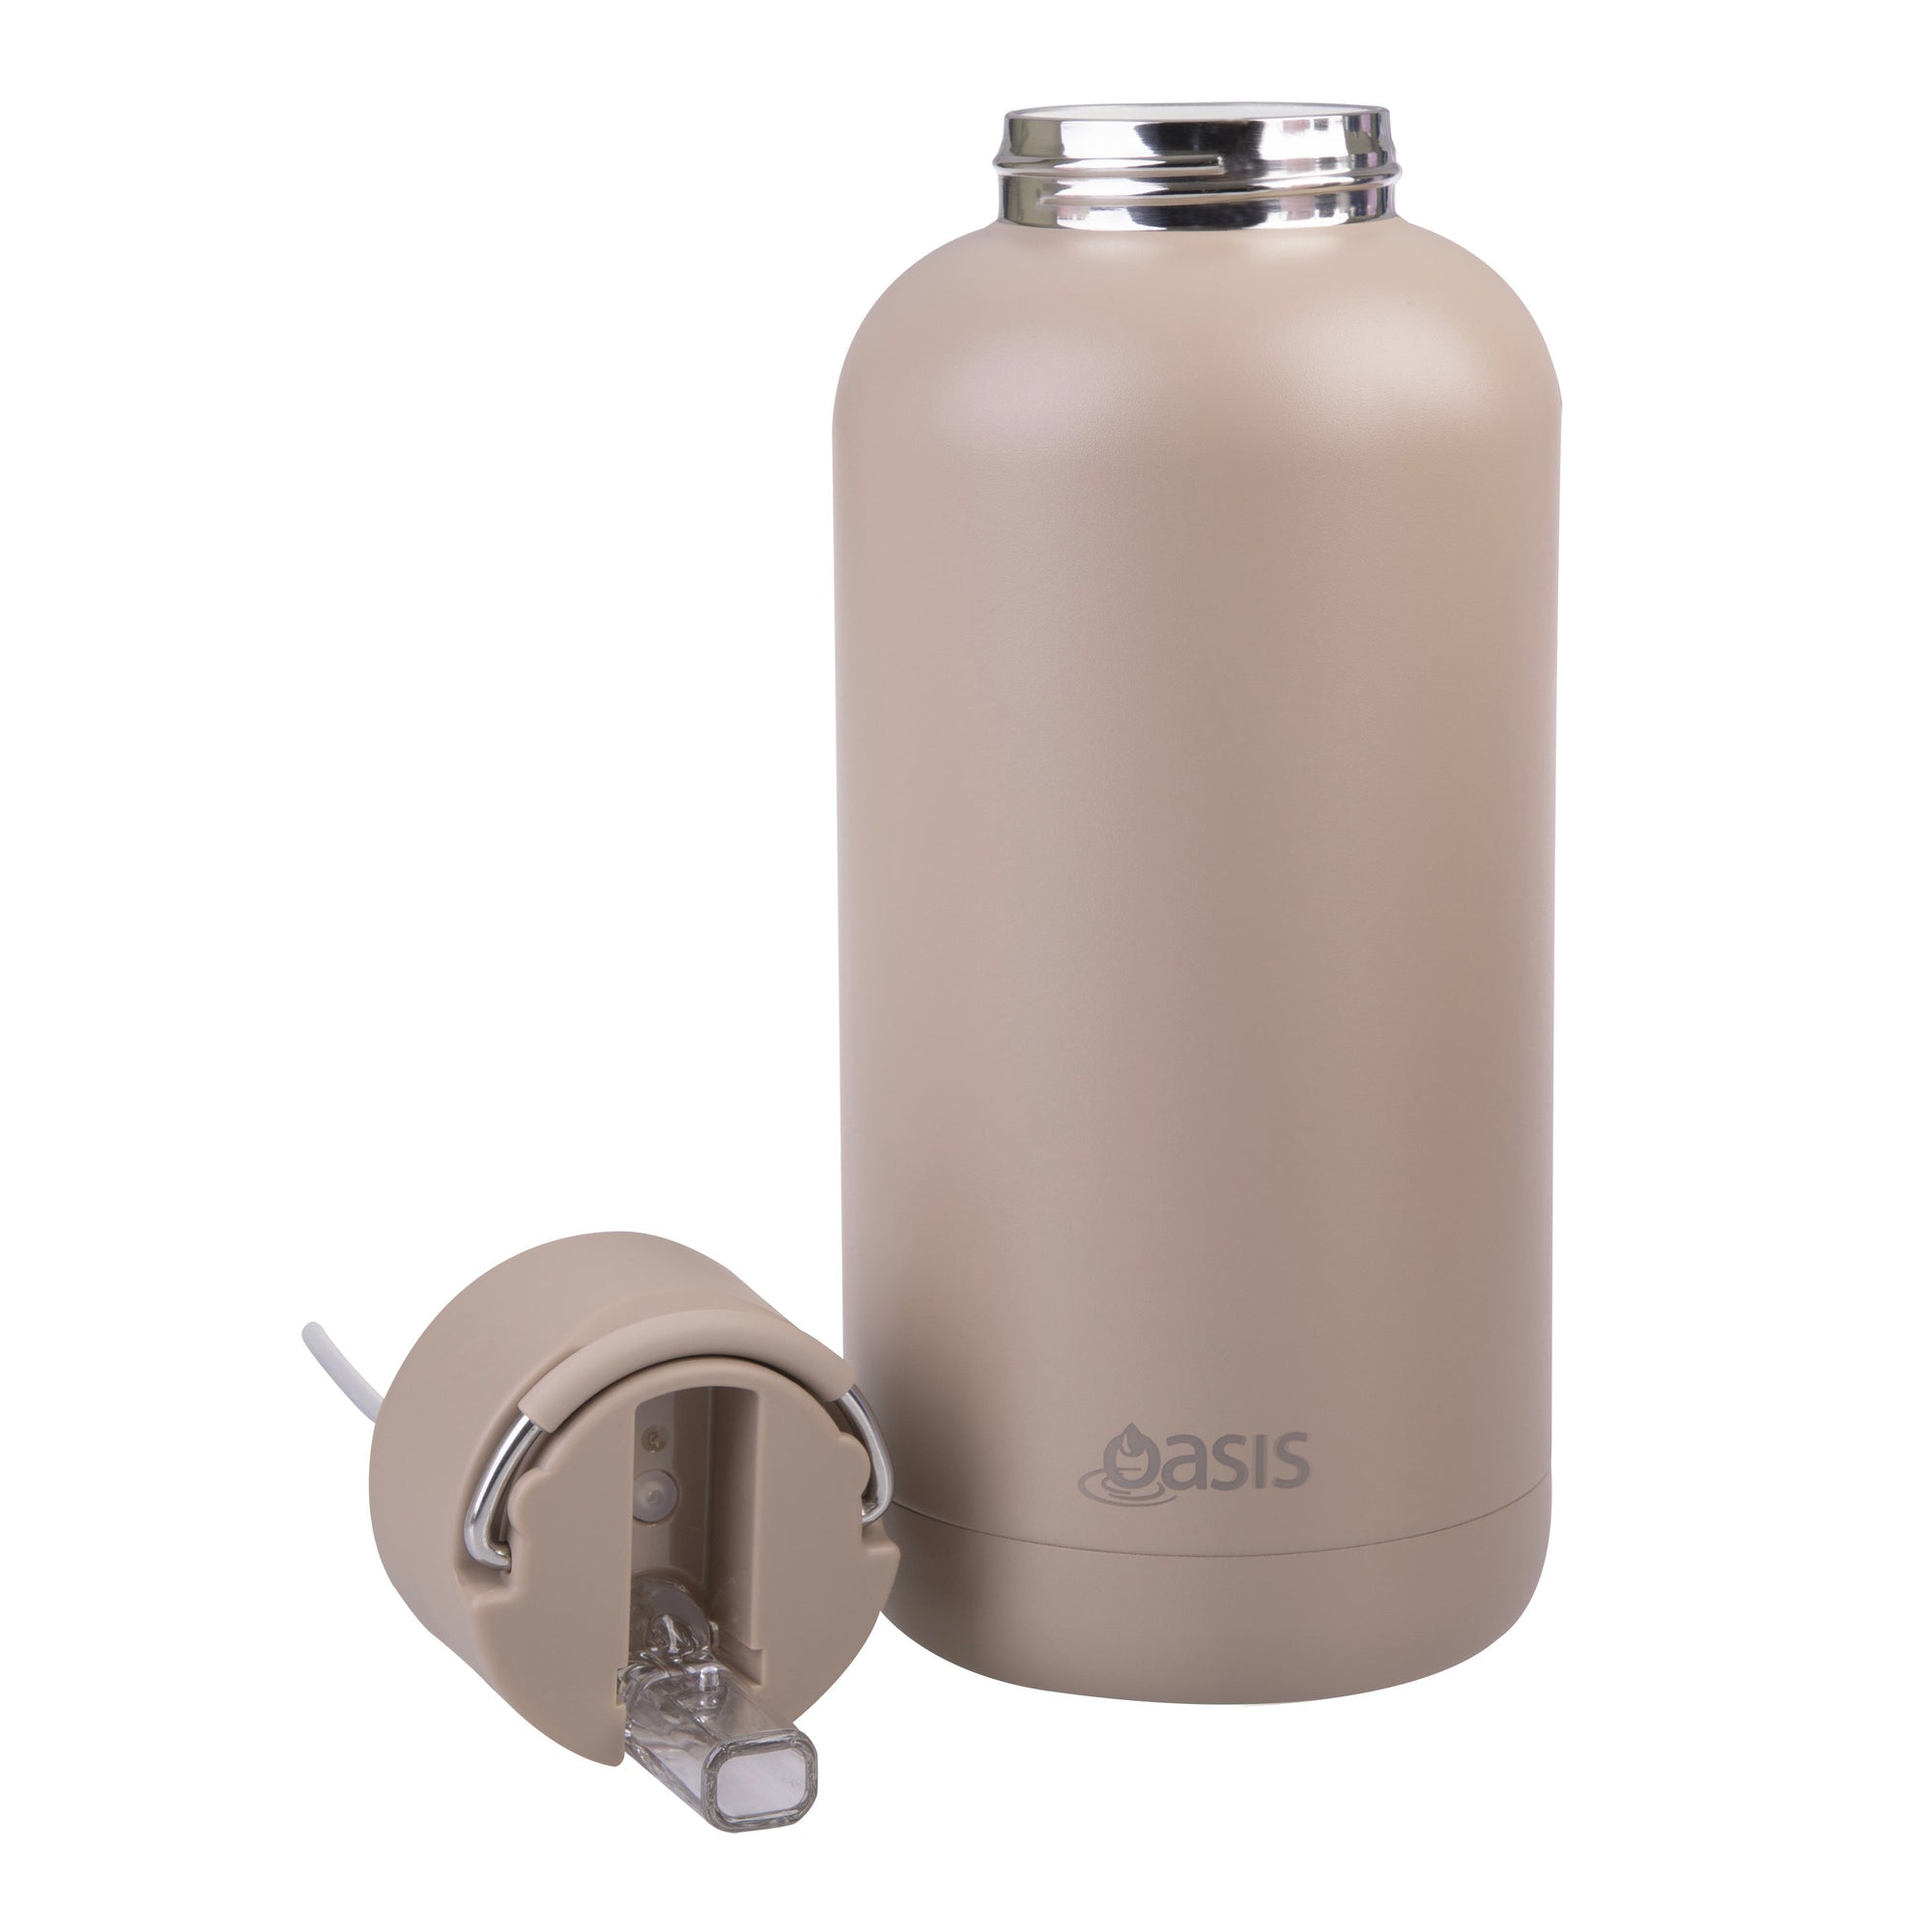 Moda 1.5L Ceramic Lined Insulated Water Bottle Latte - LIFESTYLE - Water Bottles - Soko and Co